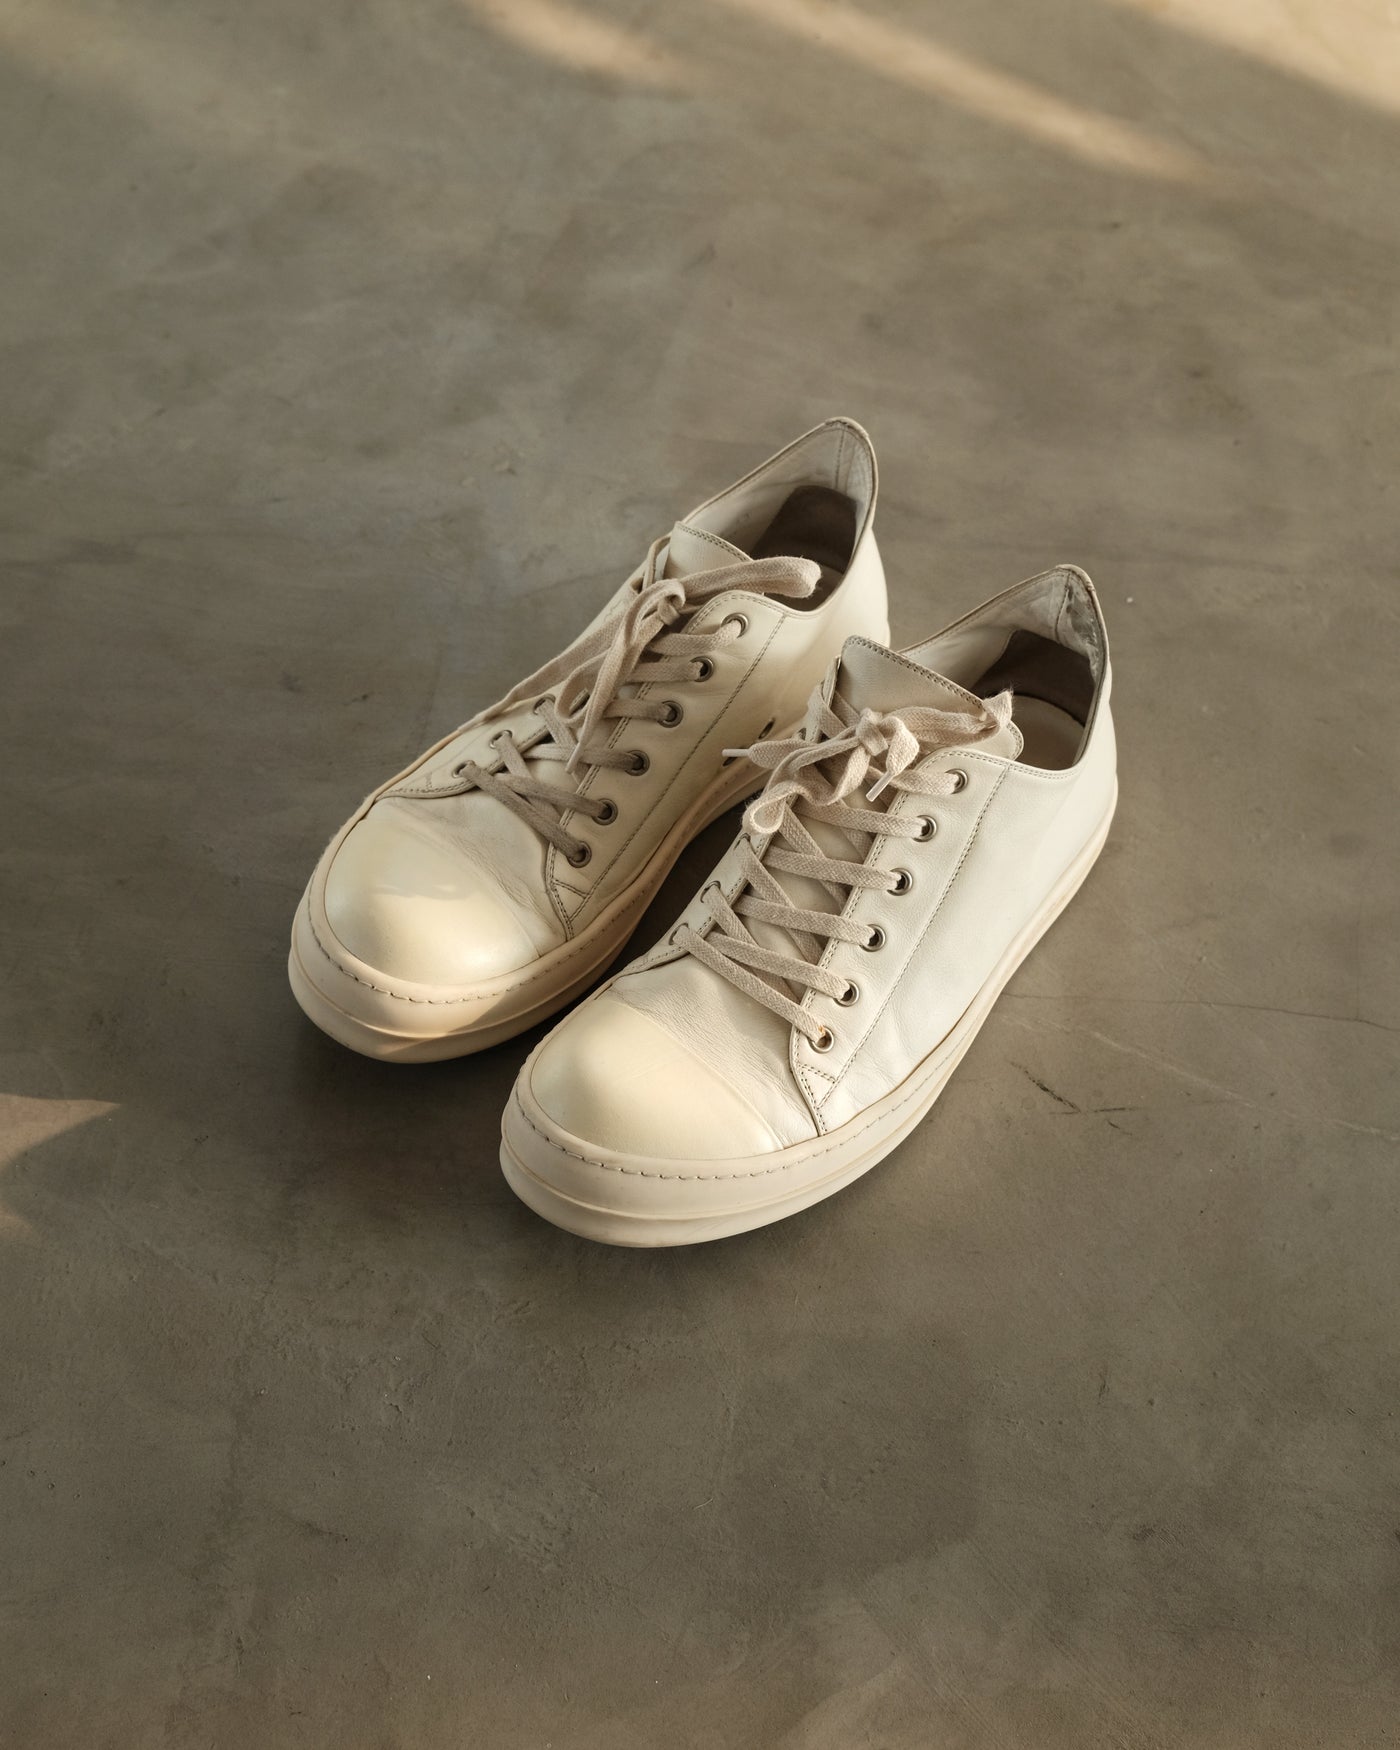 RICK OWENS 2016 Mainline Ramones Low Sneakers – Around The Shoes